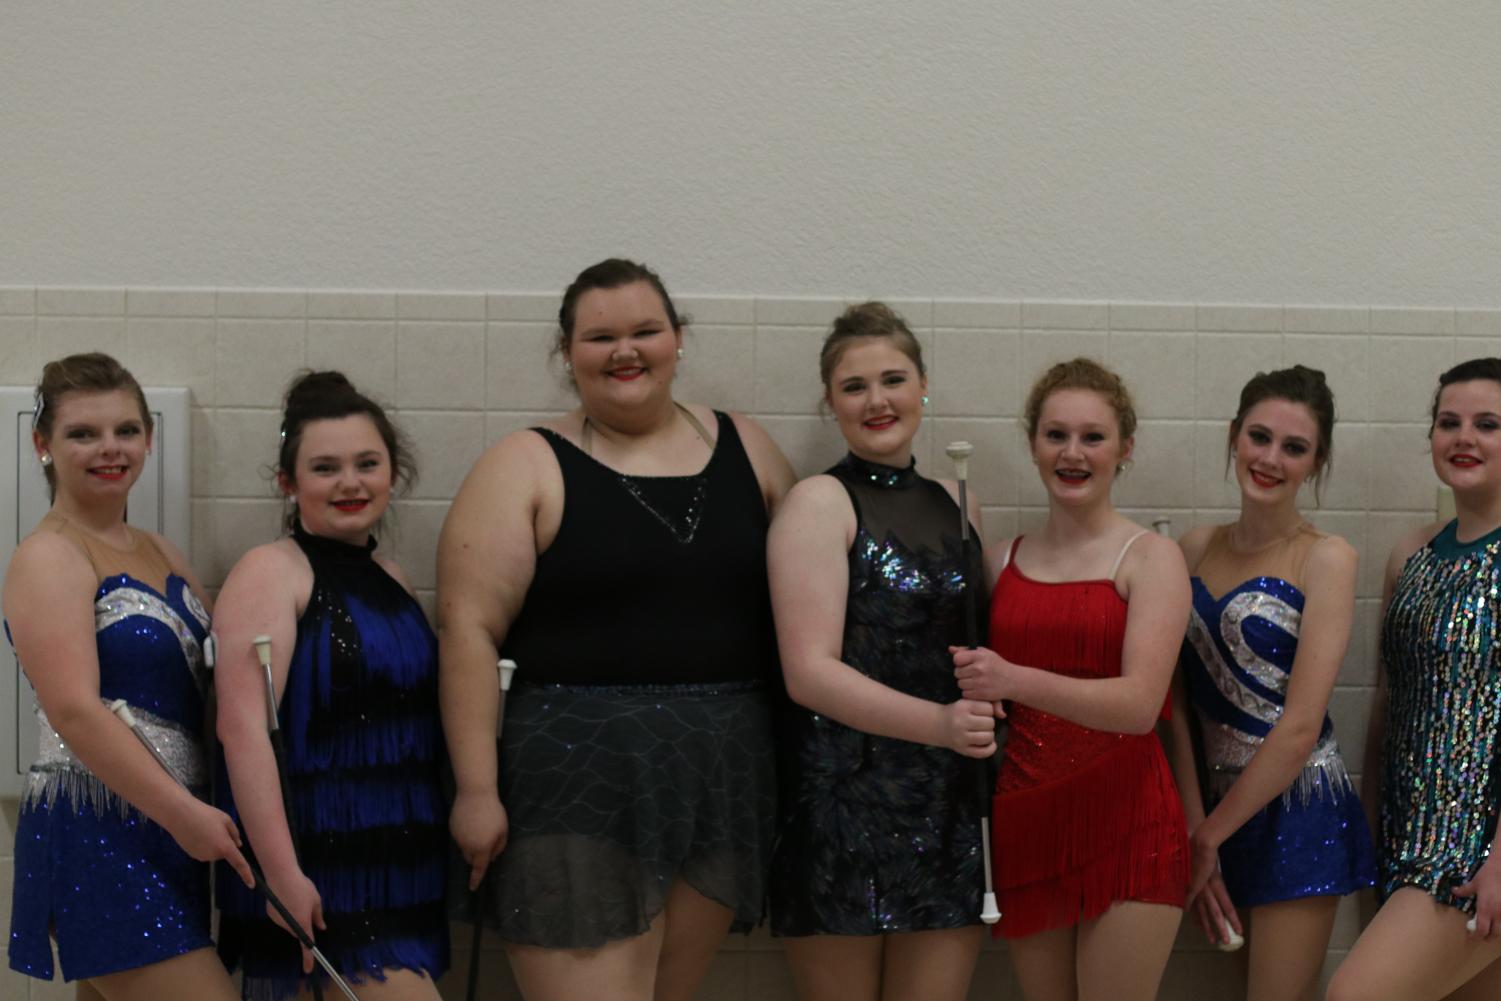 The twirlers pose after competing in their solos. All the twirlers advanced to state in their ensembles and four advanced in their solos.